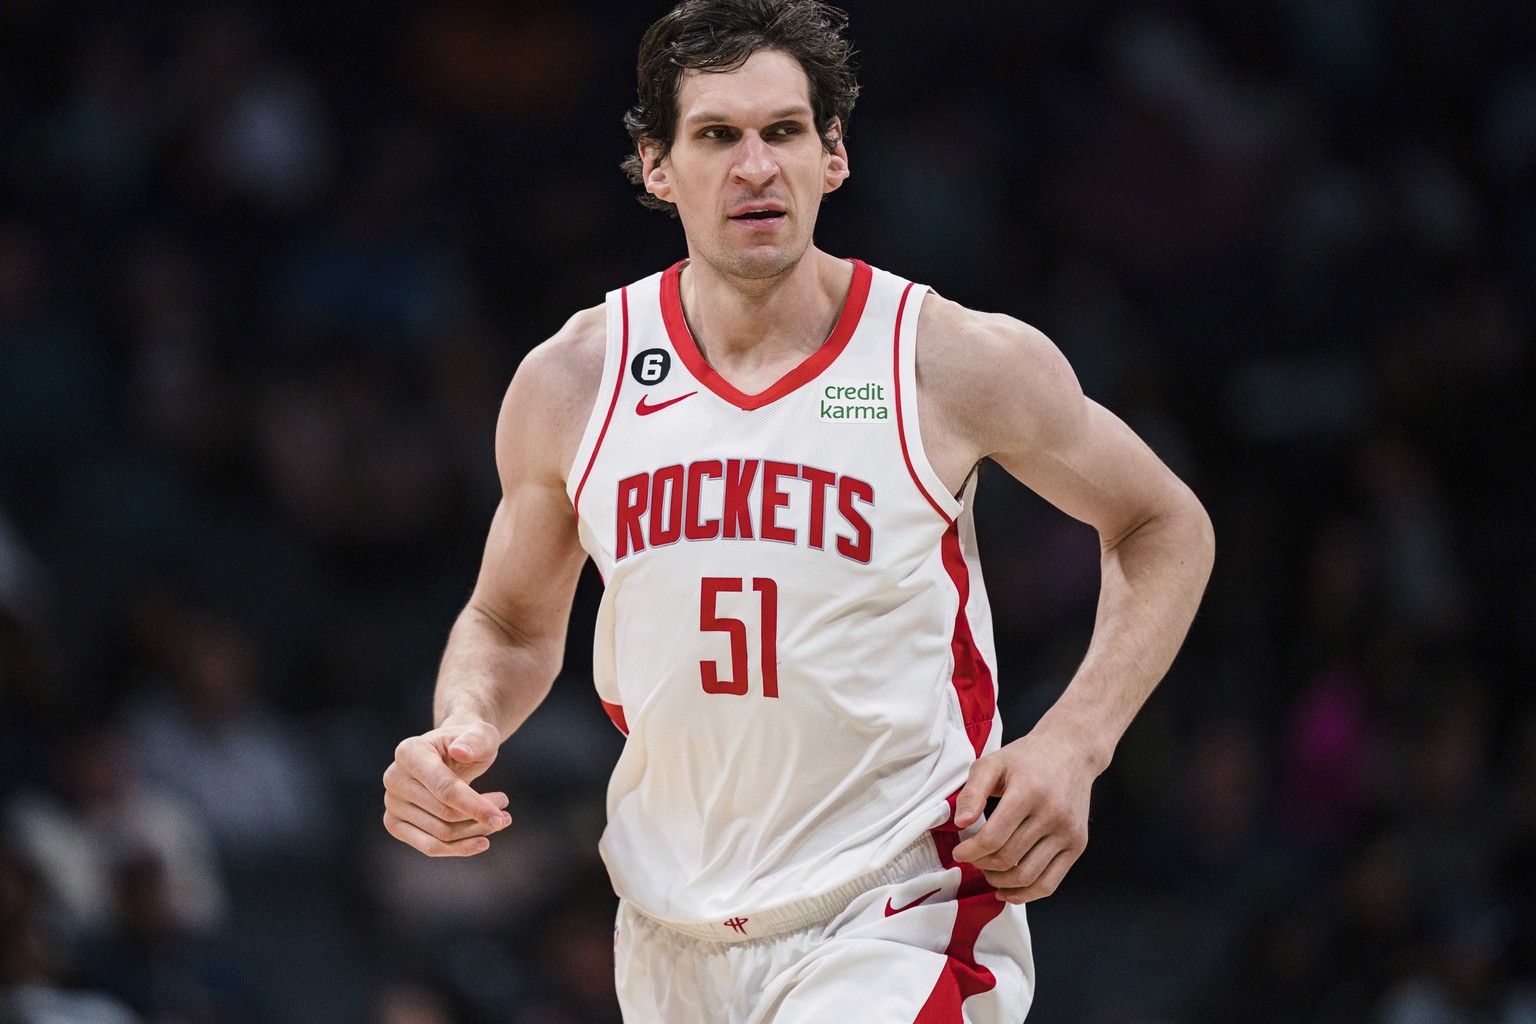 Houston Rockets center Boban Marjanovic looks on during the first half of an NBA basketball game against the Charlotte Hornets in Charlotte, N.C., Friday, April 7, 2023. (AP Photo/Jacob Kupferman)